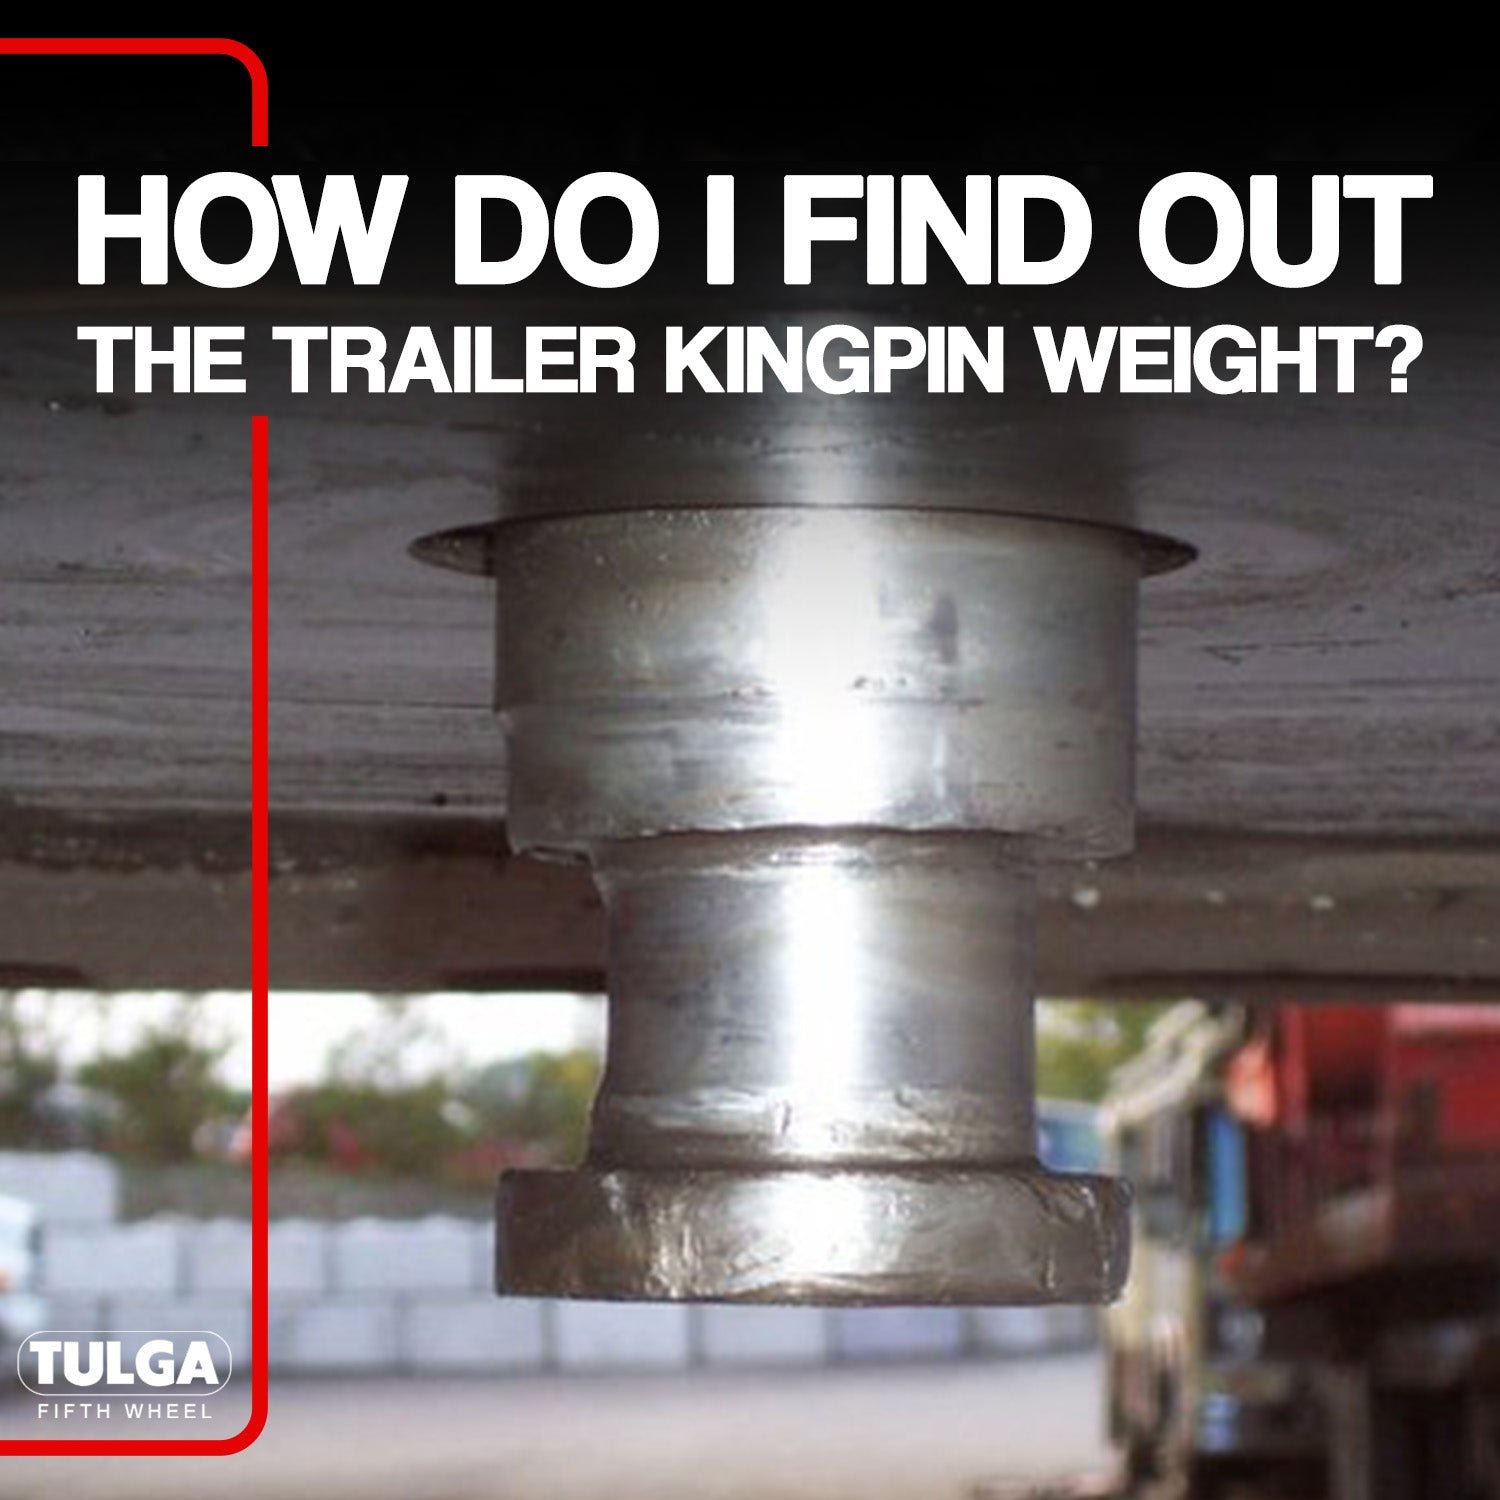 How do I Find Out the Trailer Kingpin Weight?